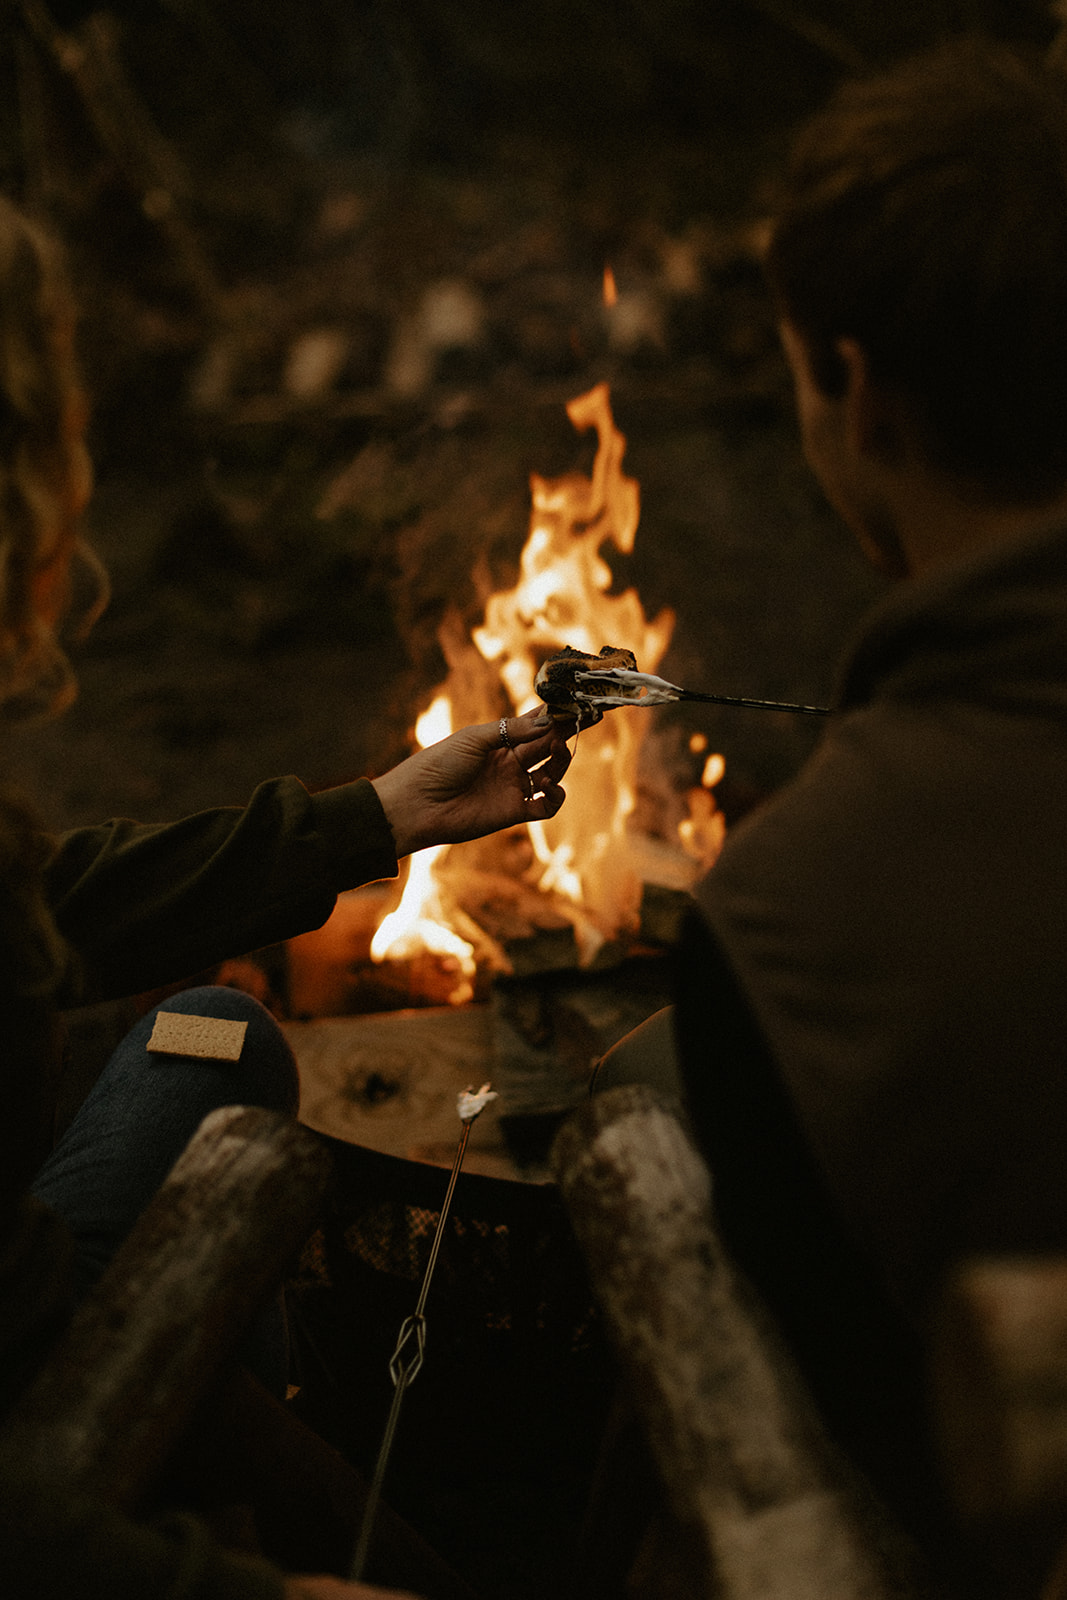 A couple making s'mores around a campfire together